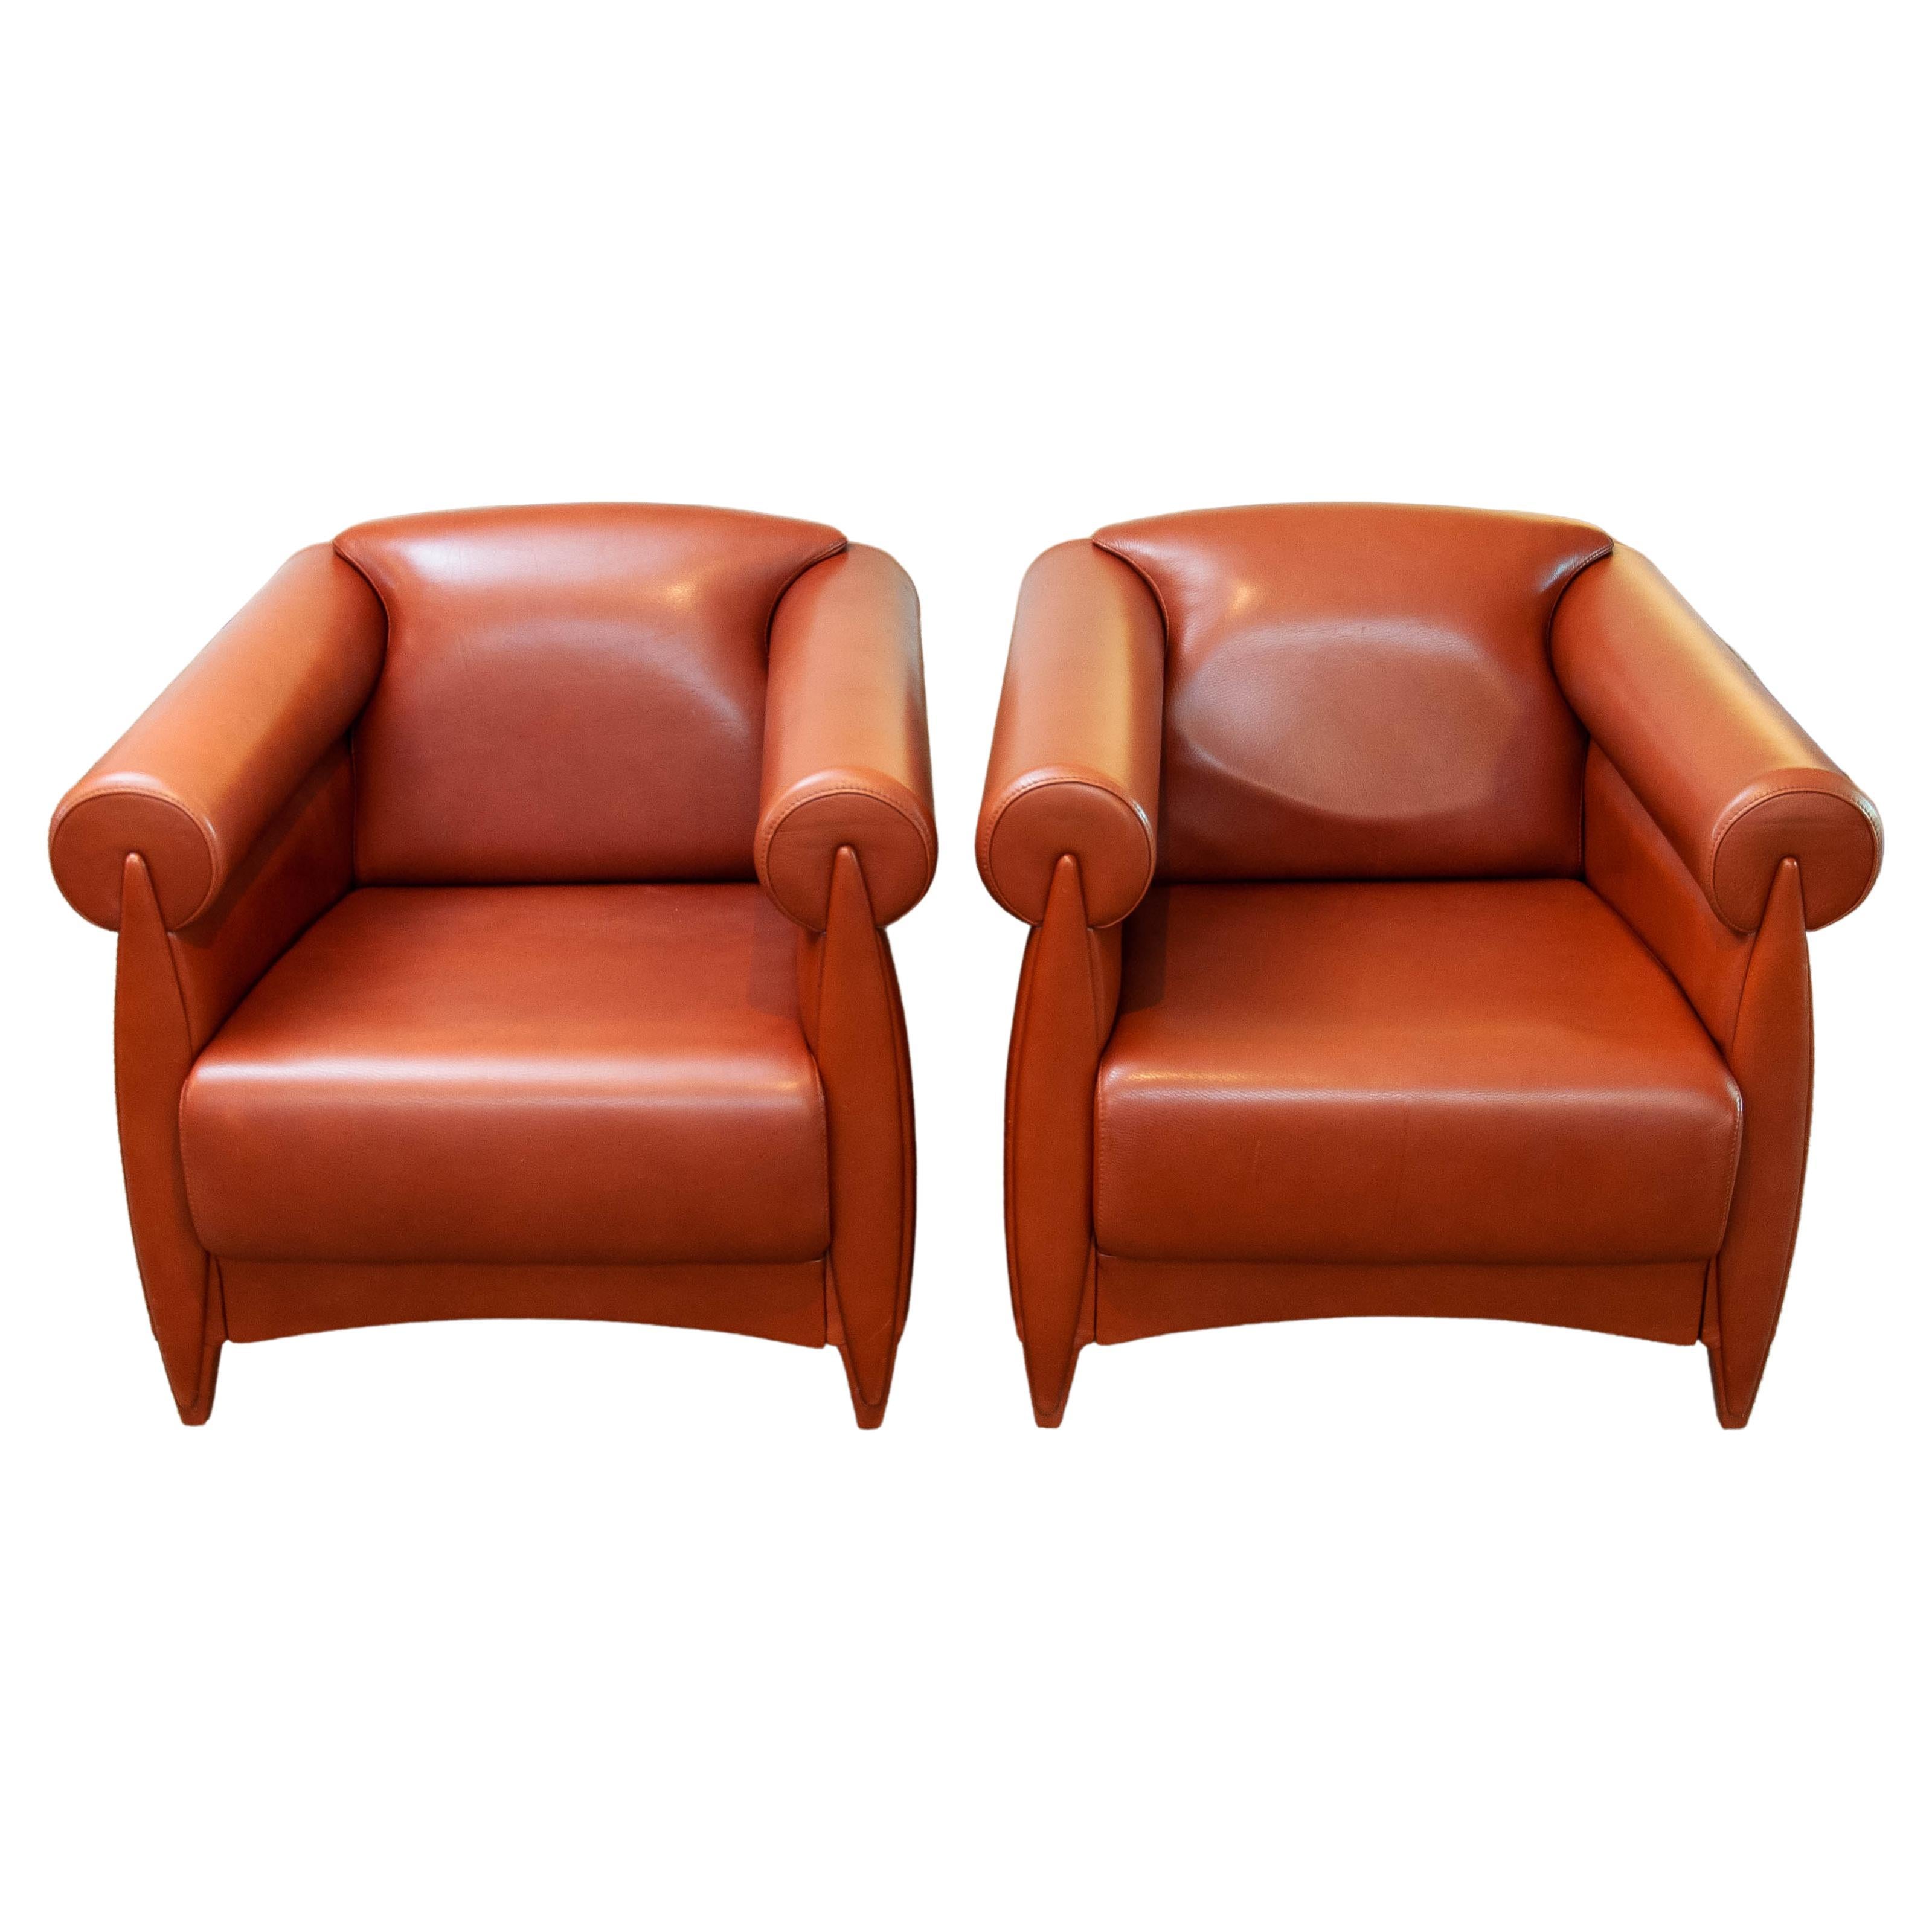 1980s Modern Pair Lounge / Club Chairs In Cognac Leather By Klaus Wettergren